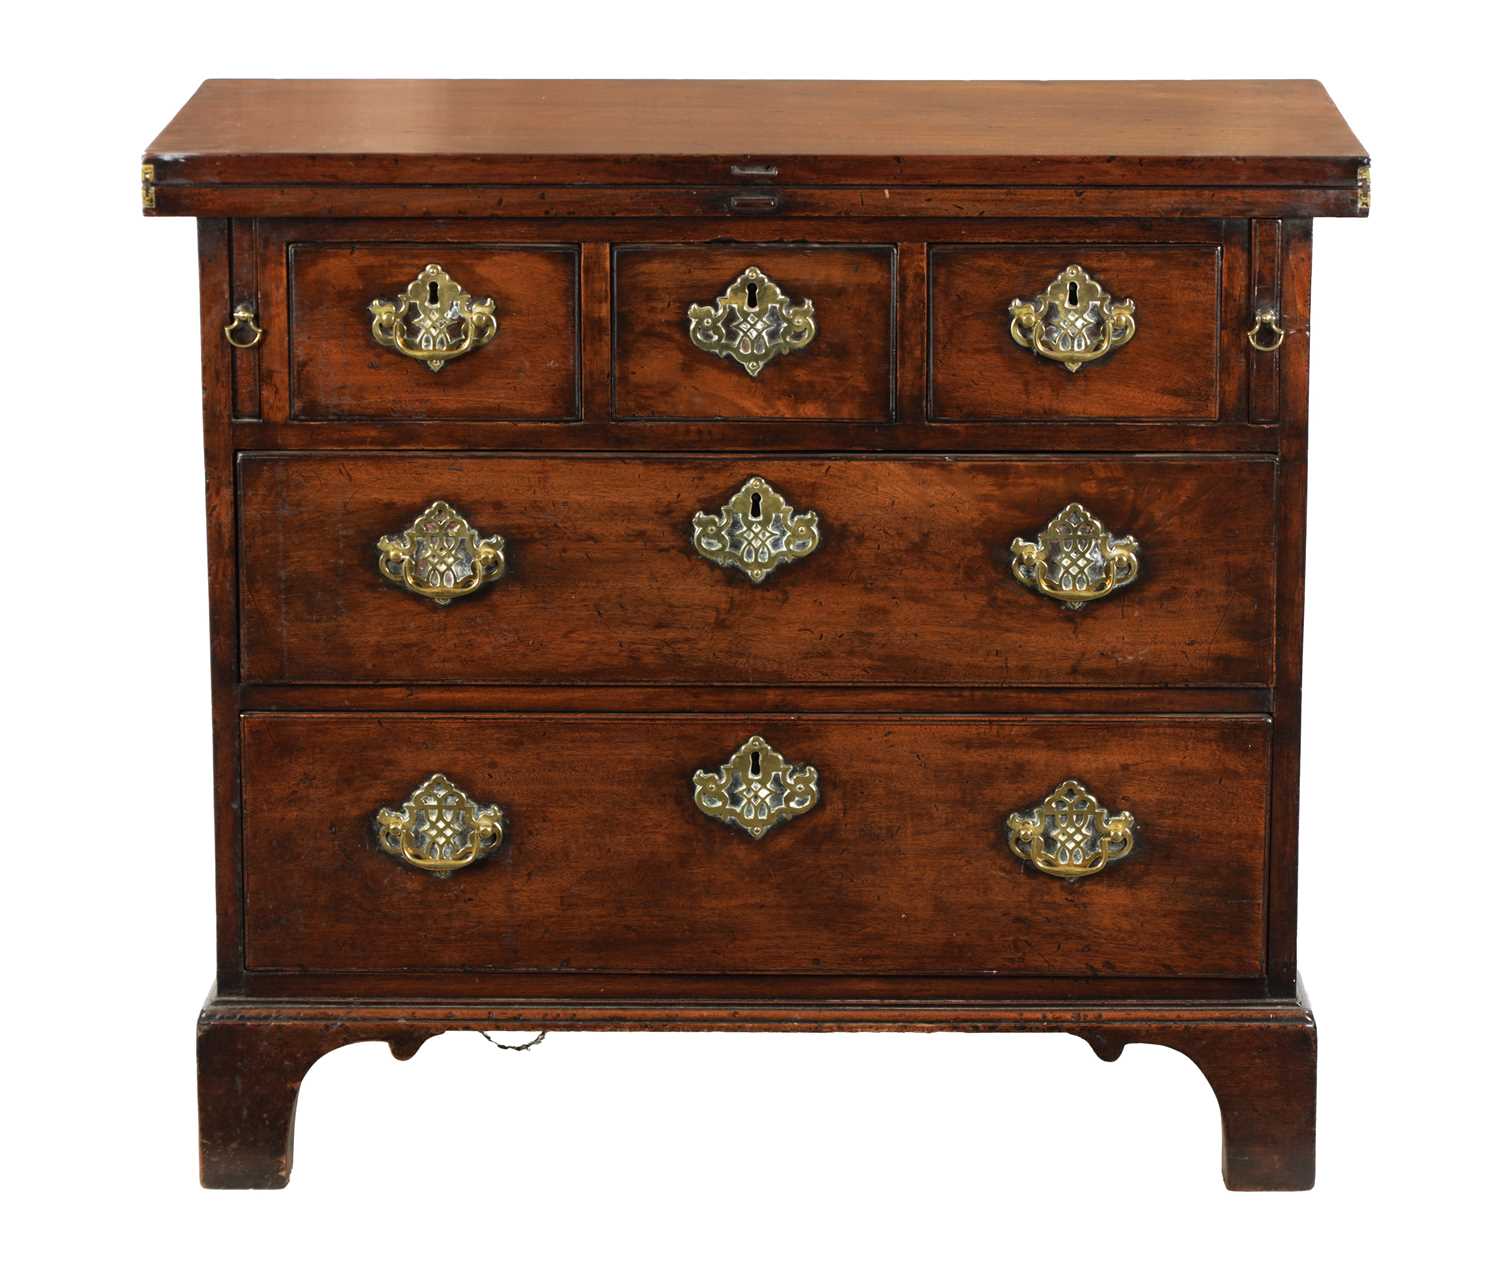 AN EARLY 18TH CENTURY WALNUT BACHELORS CHEST